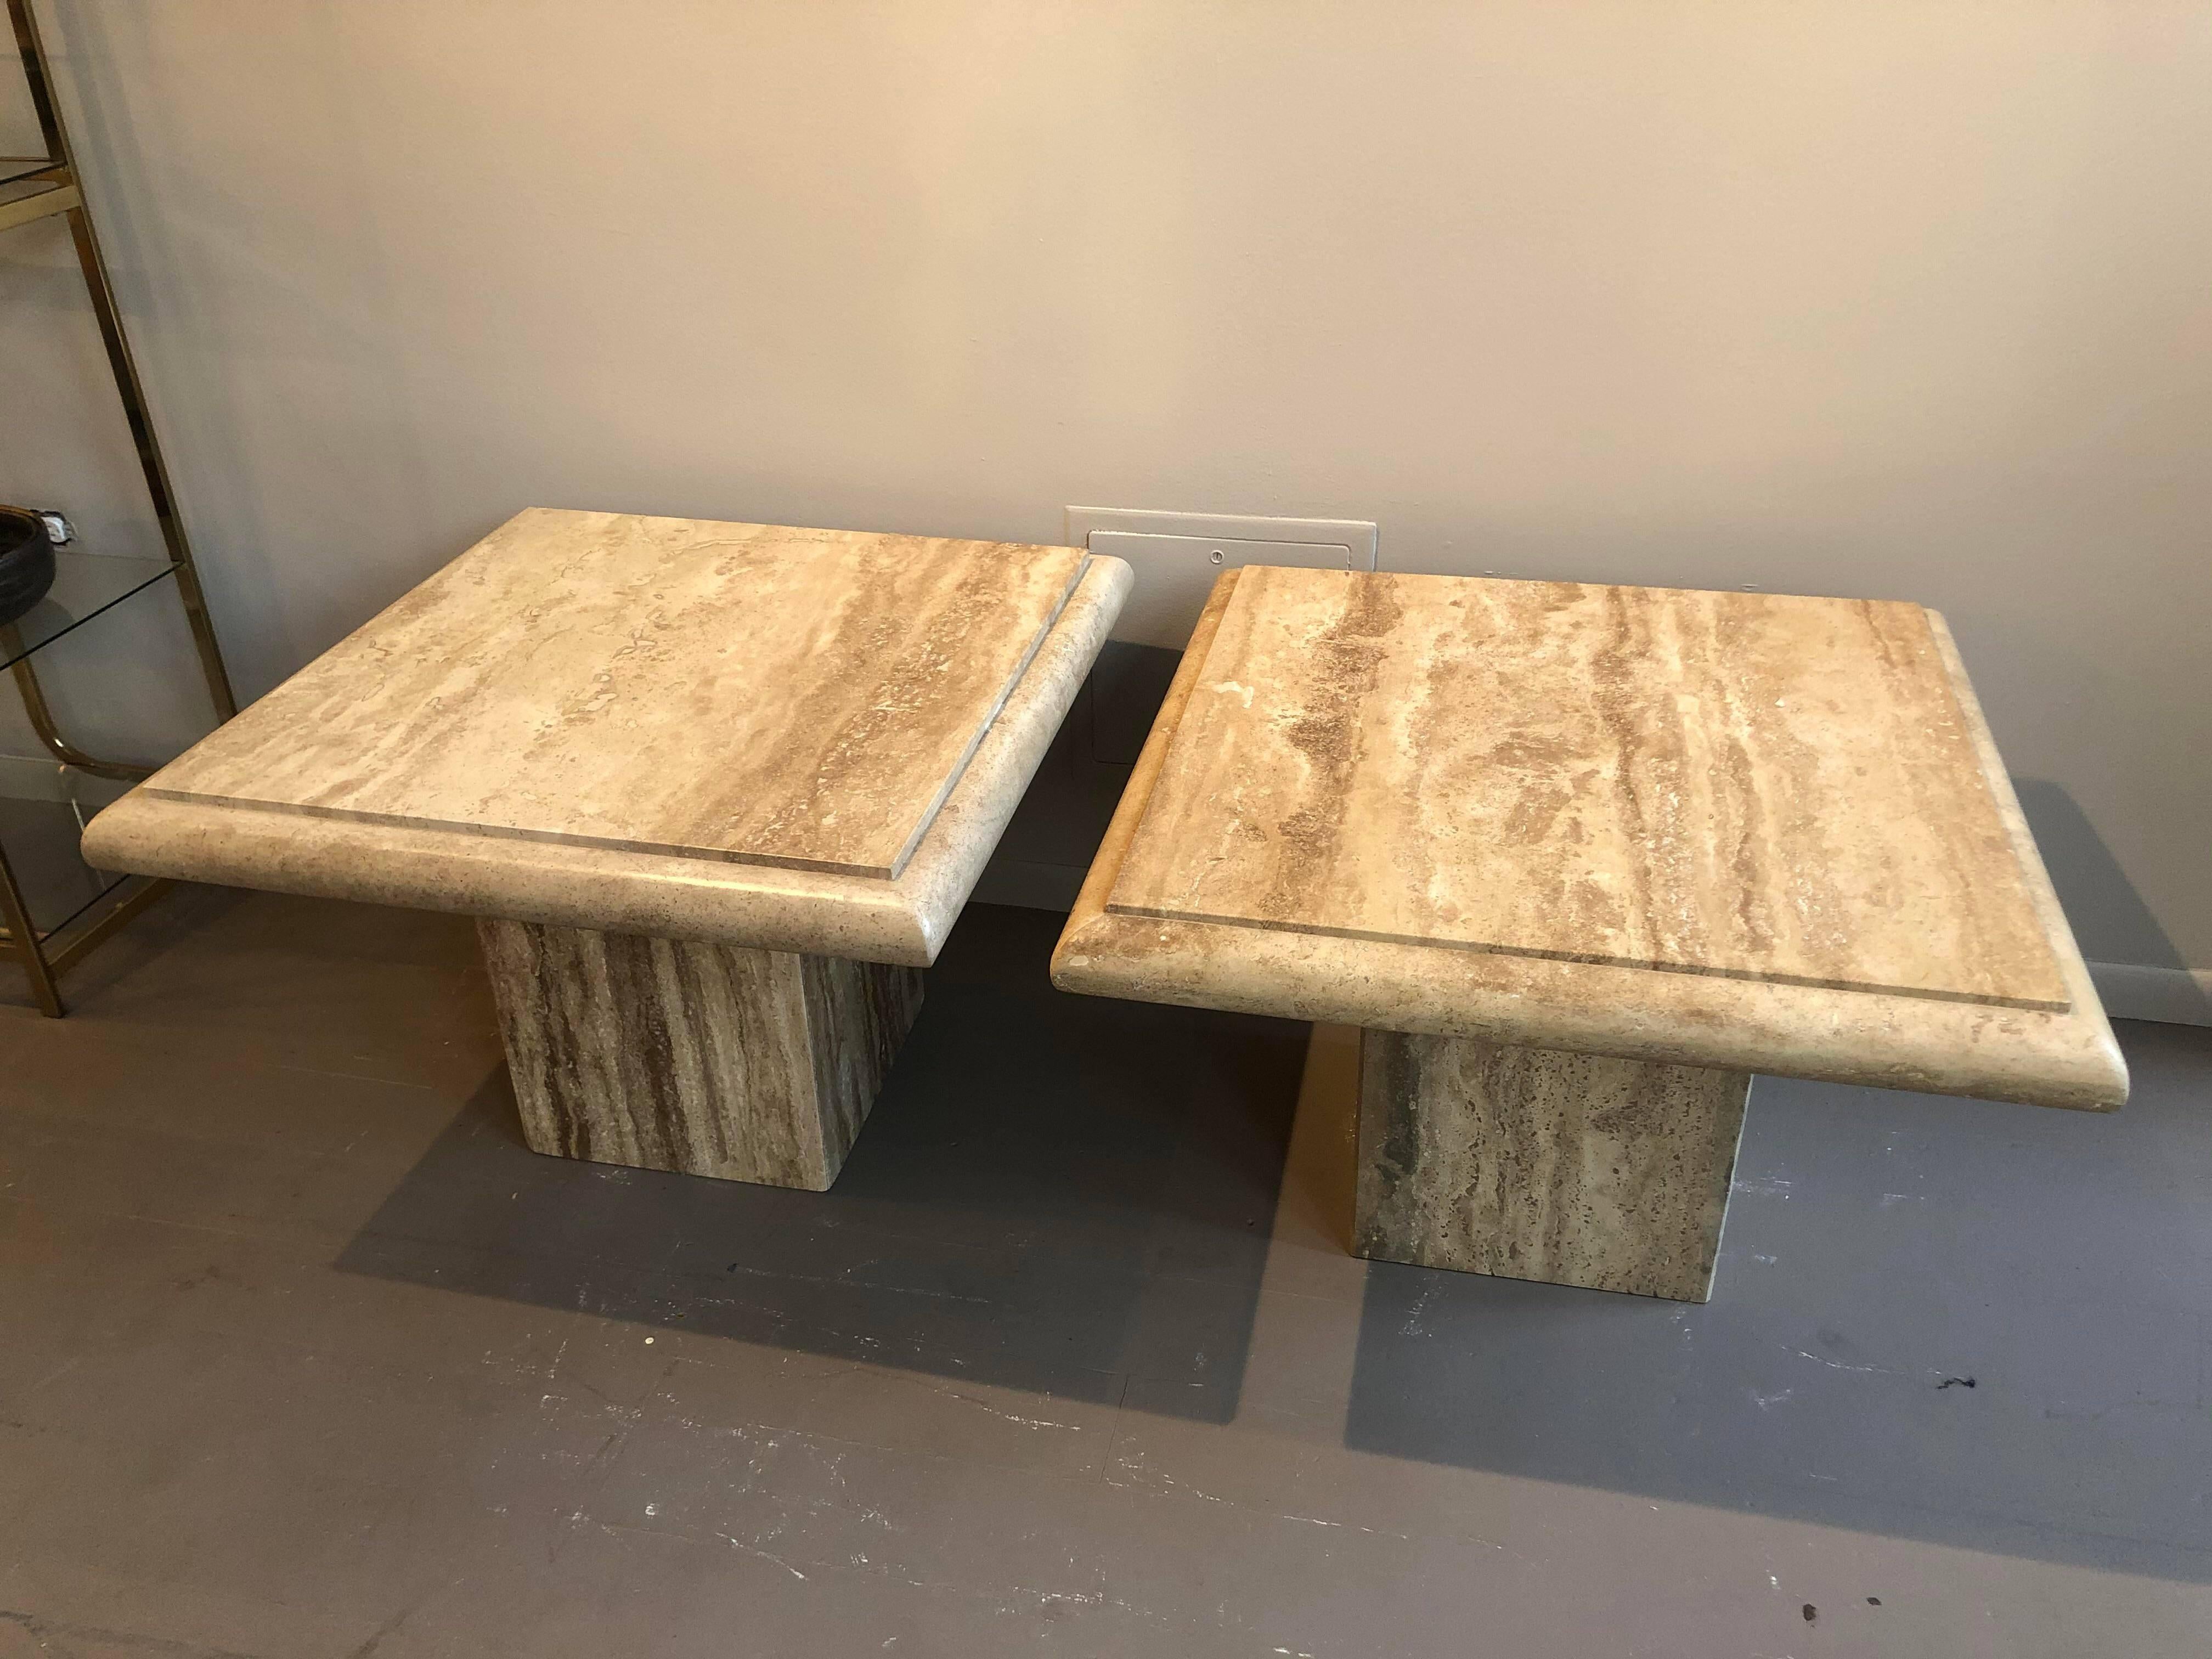 Gorgeous pair of creamy taupe brown travertine. Very solid, no chips or cracks anywhere. Darker than most travertine, these tables are beautiful.

Dimensions: 30